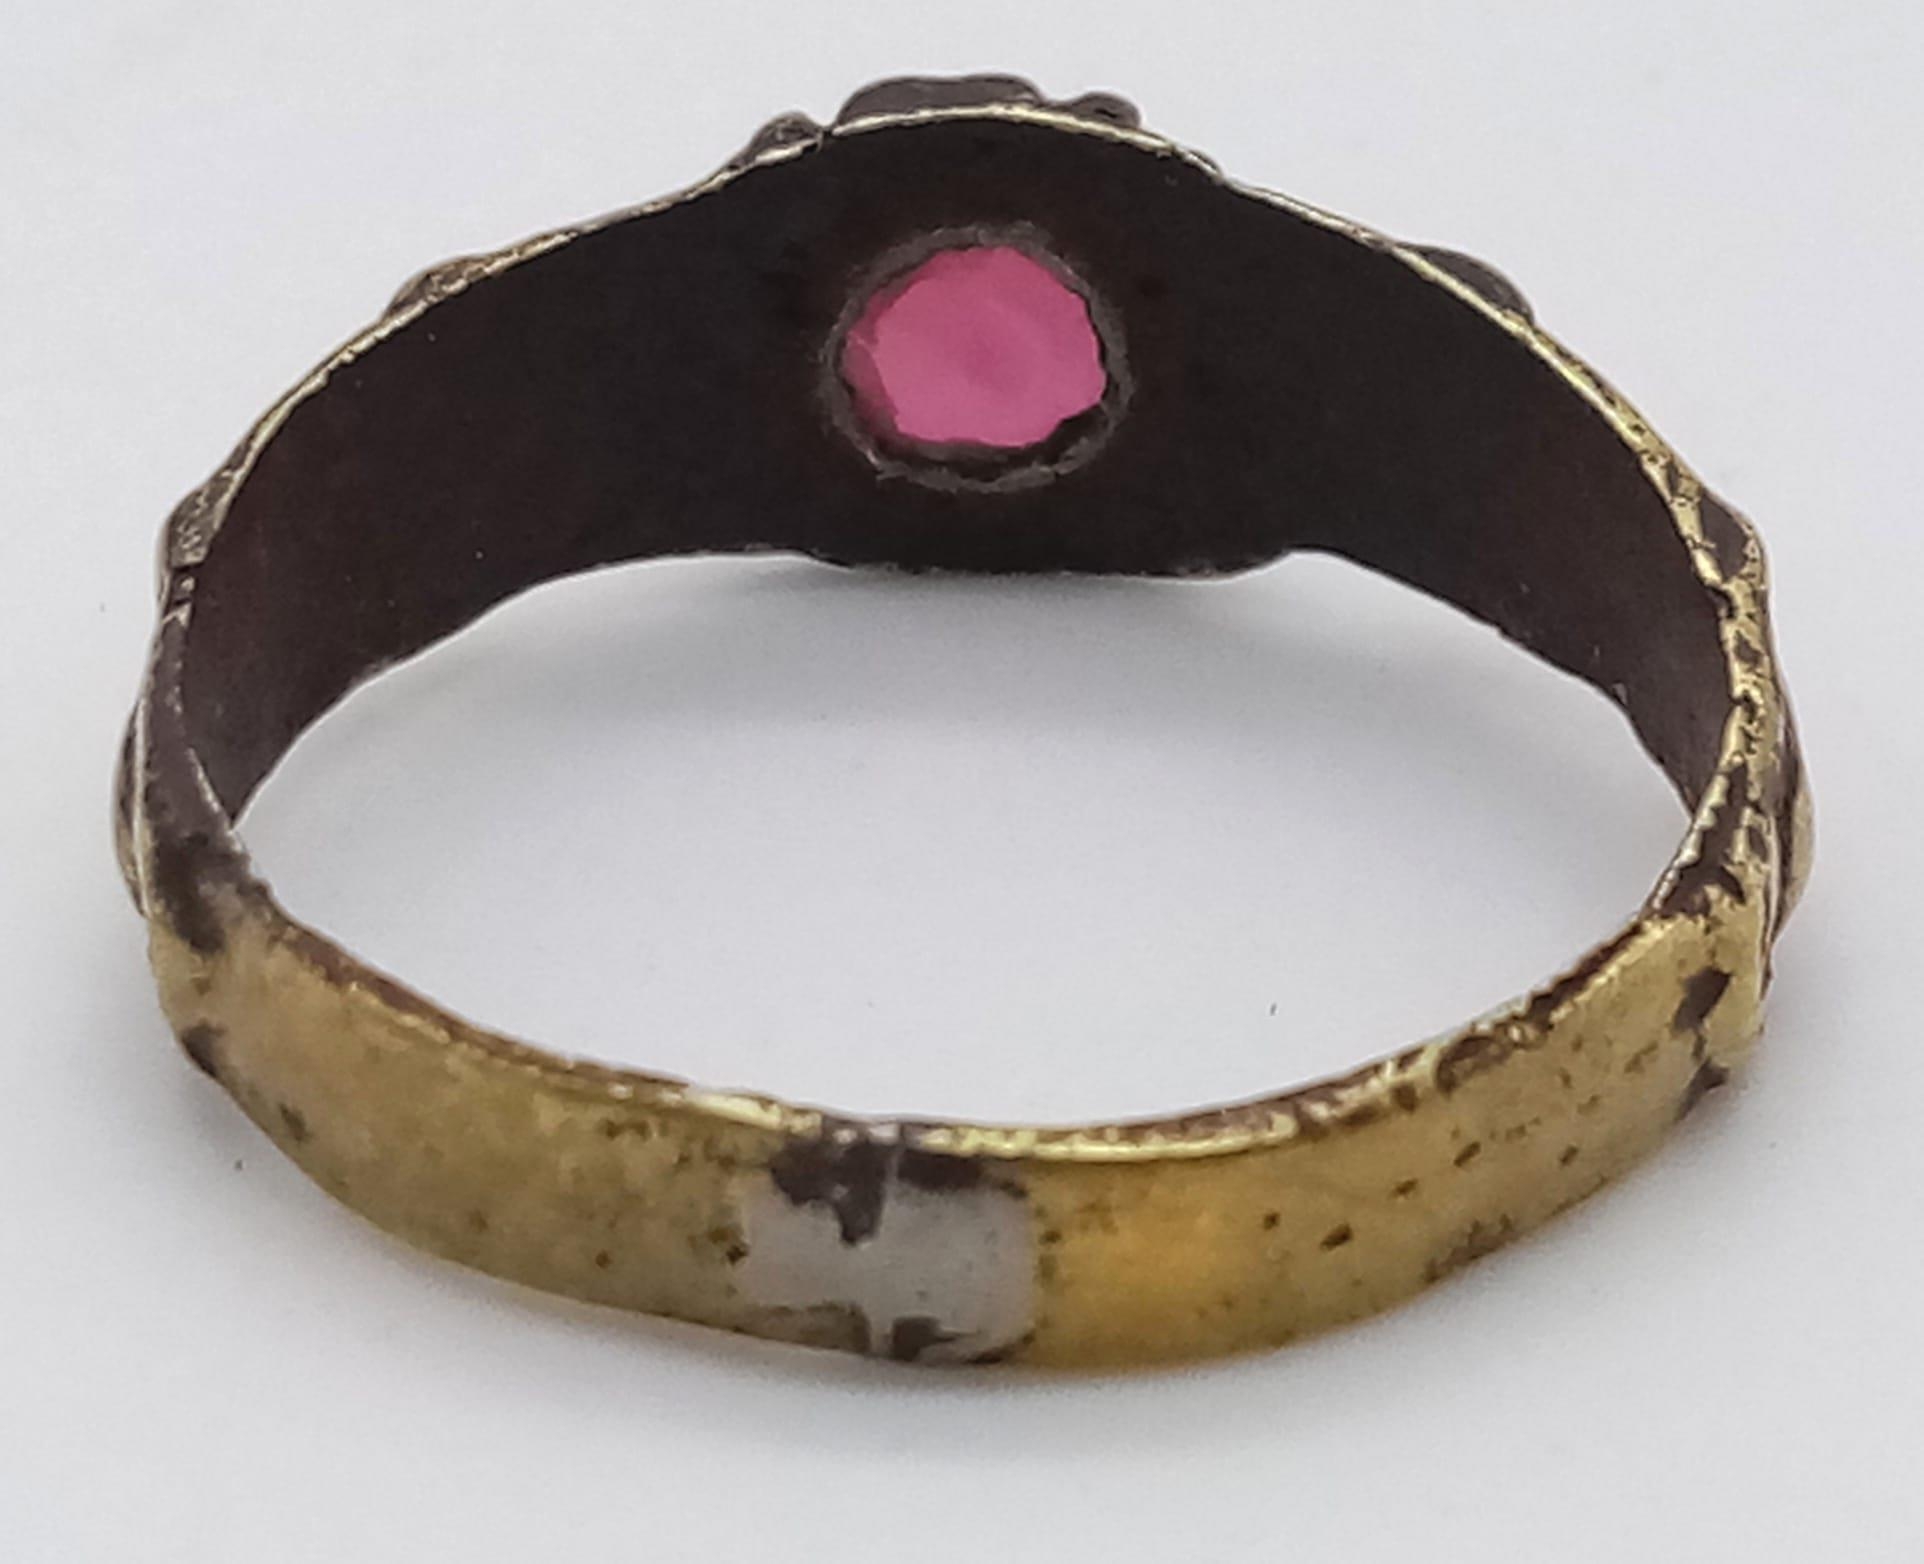 An Antique High-Grade Gold and Ruby Ring - Possibly 16th Century. Size V. 2.73g total weight. - Image 3 of 3